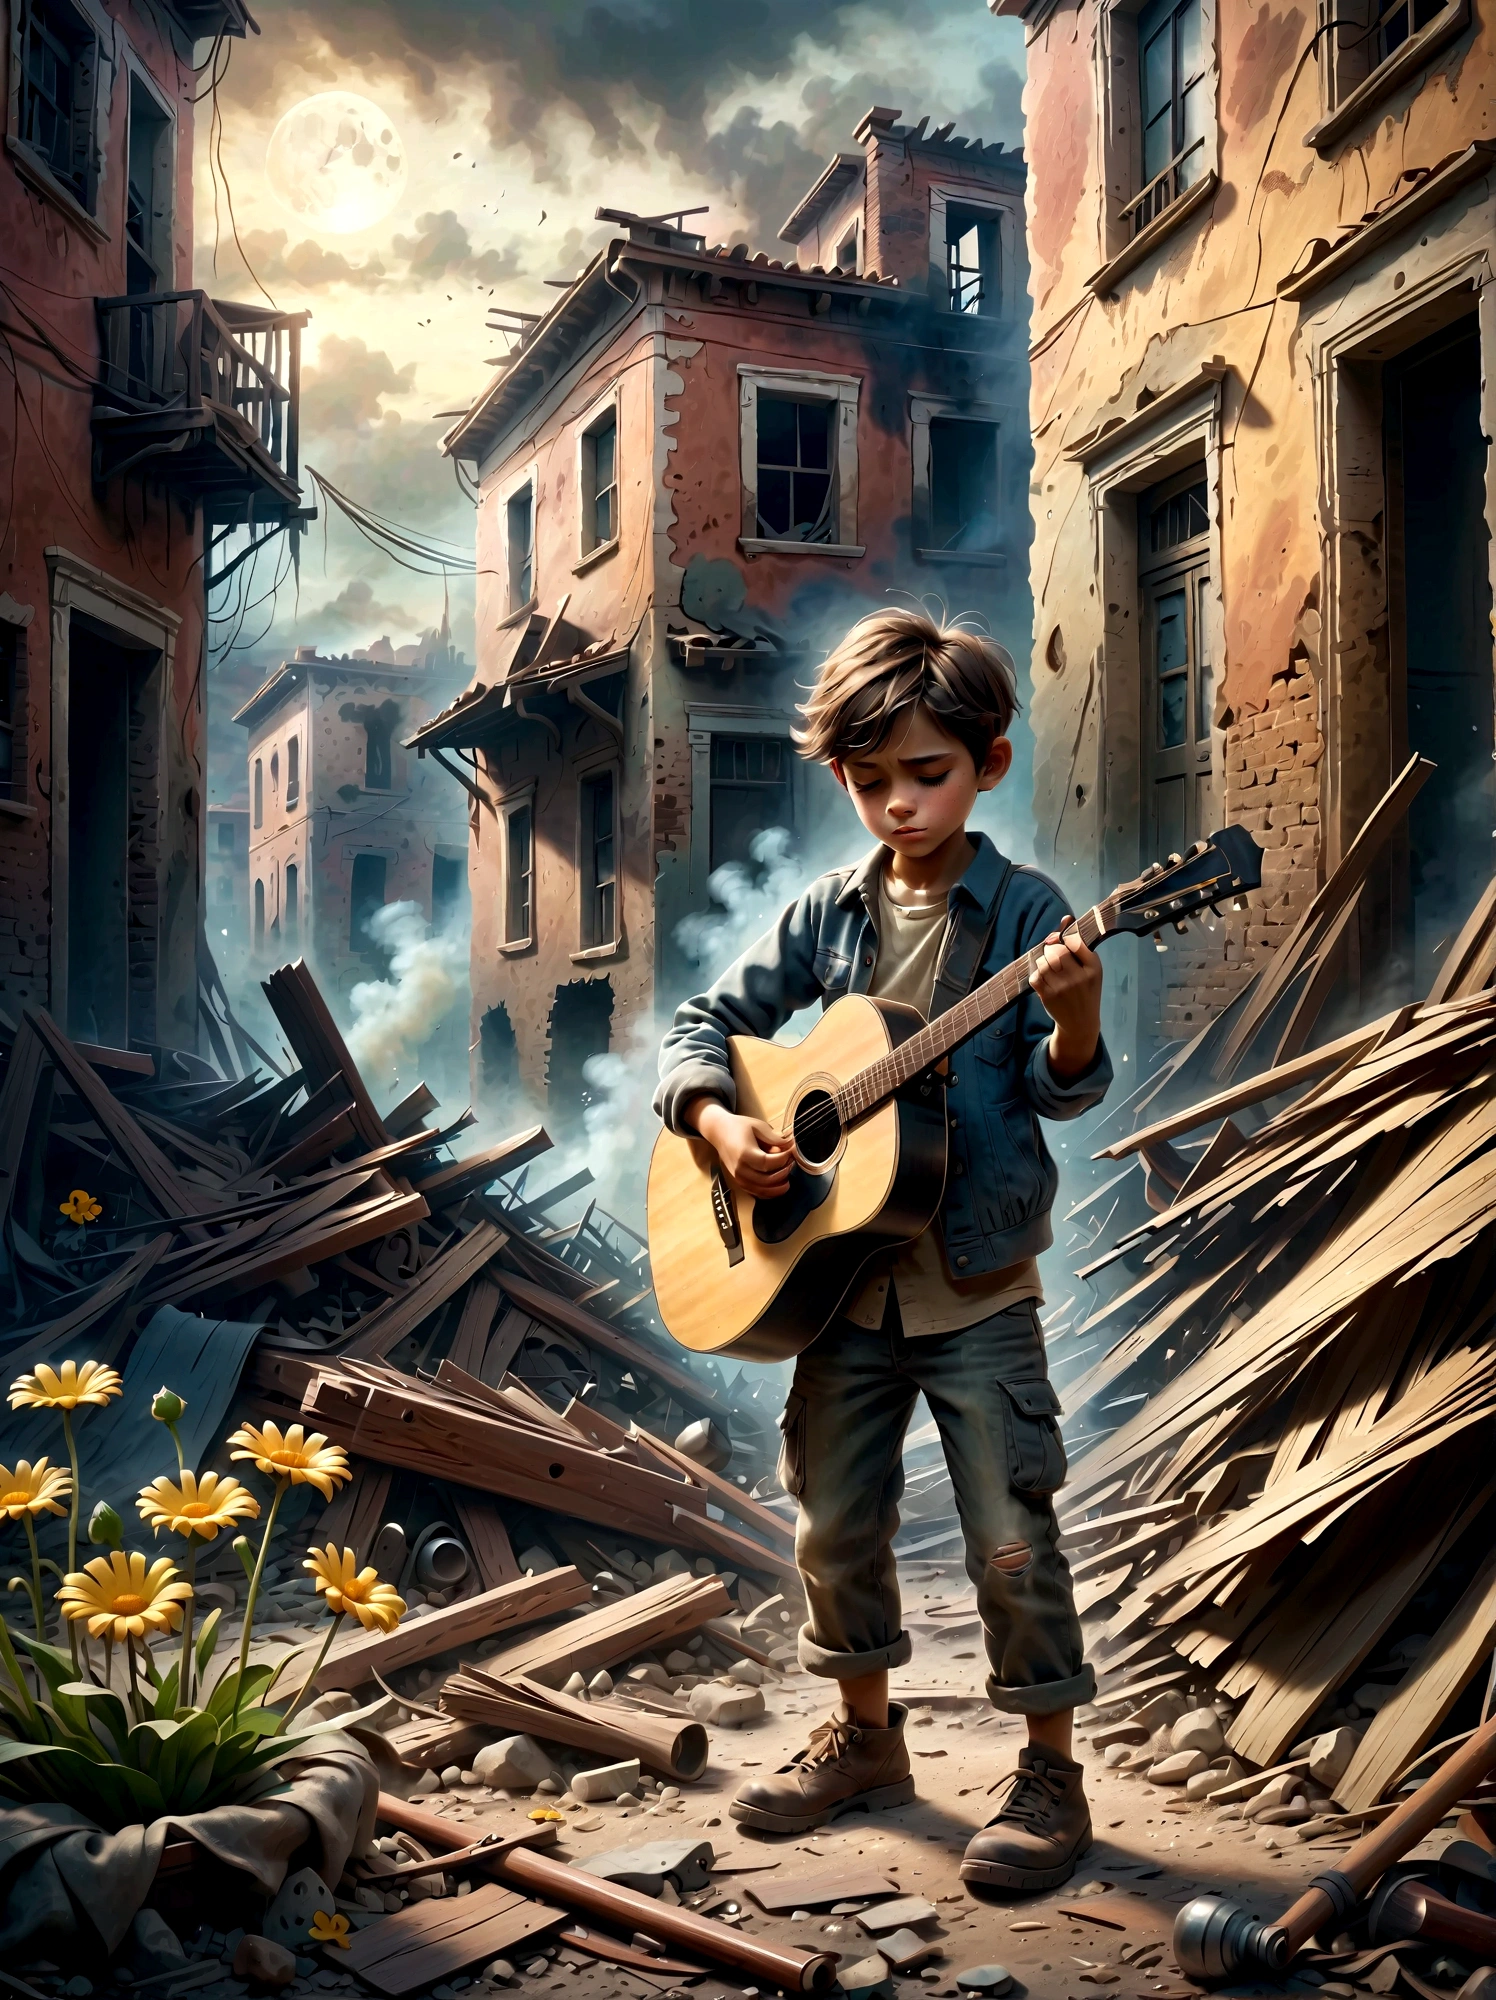 In the midst of a war-torn, smoky ruin, a  child is playing a guitar, (A tenacious little flower grows at the child&#39;s feet), The scene captures the stark contrast between the devastation of the surroundings and the innocence of the . The ruins are filled with debris and remnants of buildings, with smoke and fire in the background. The child's expression is somber, reflecting the harsh reality of the situation. The overall mood is poignant and emotional, with muted colors and dramatic lighting to emphasize the desolation and the glimmer of hope represented by the music.